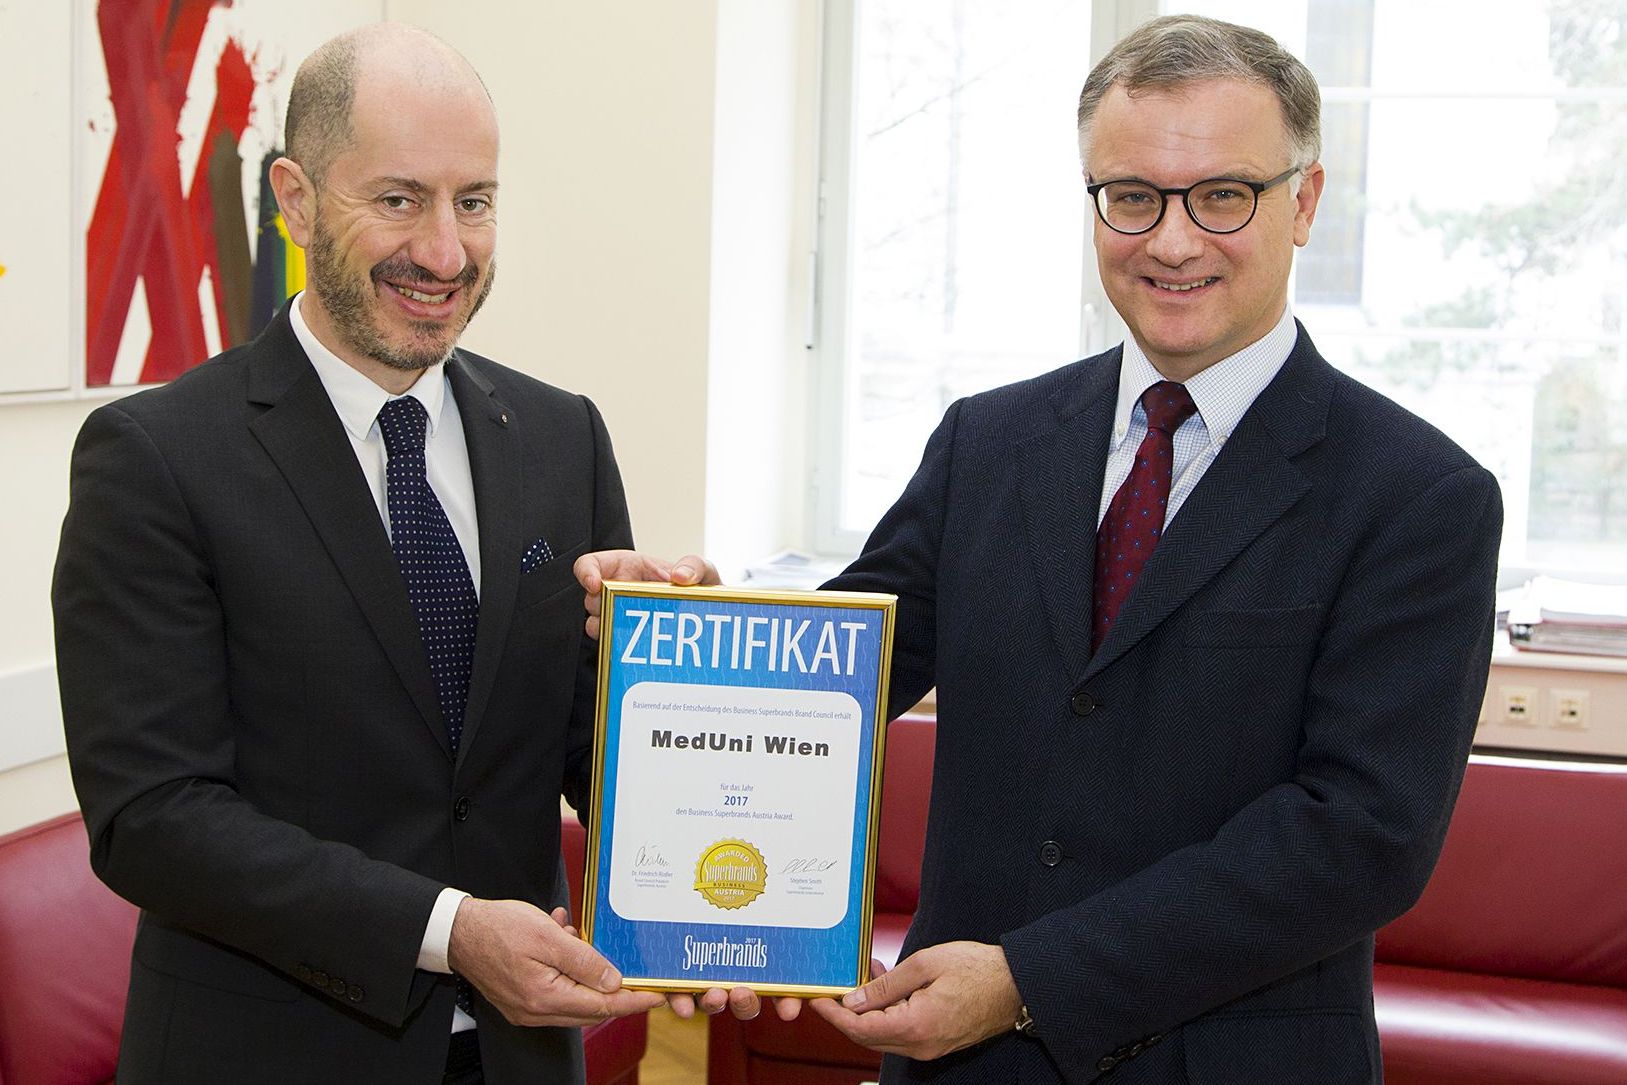 Awarding the certificate to Rector Müller (right)